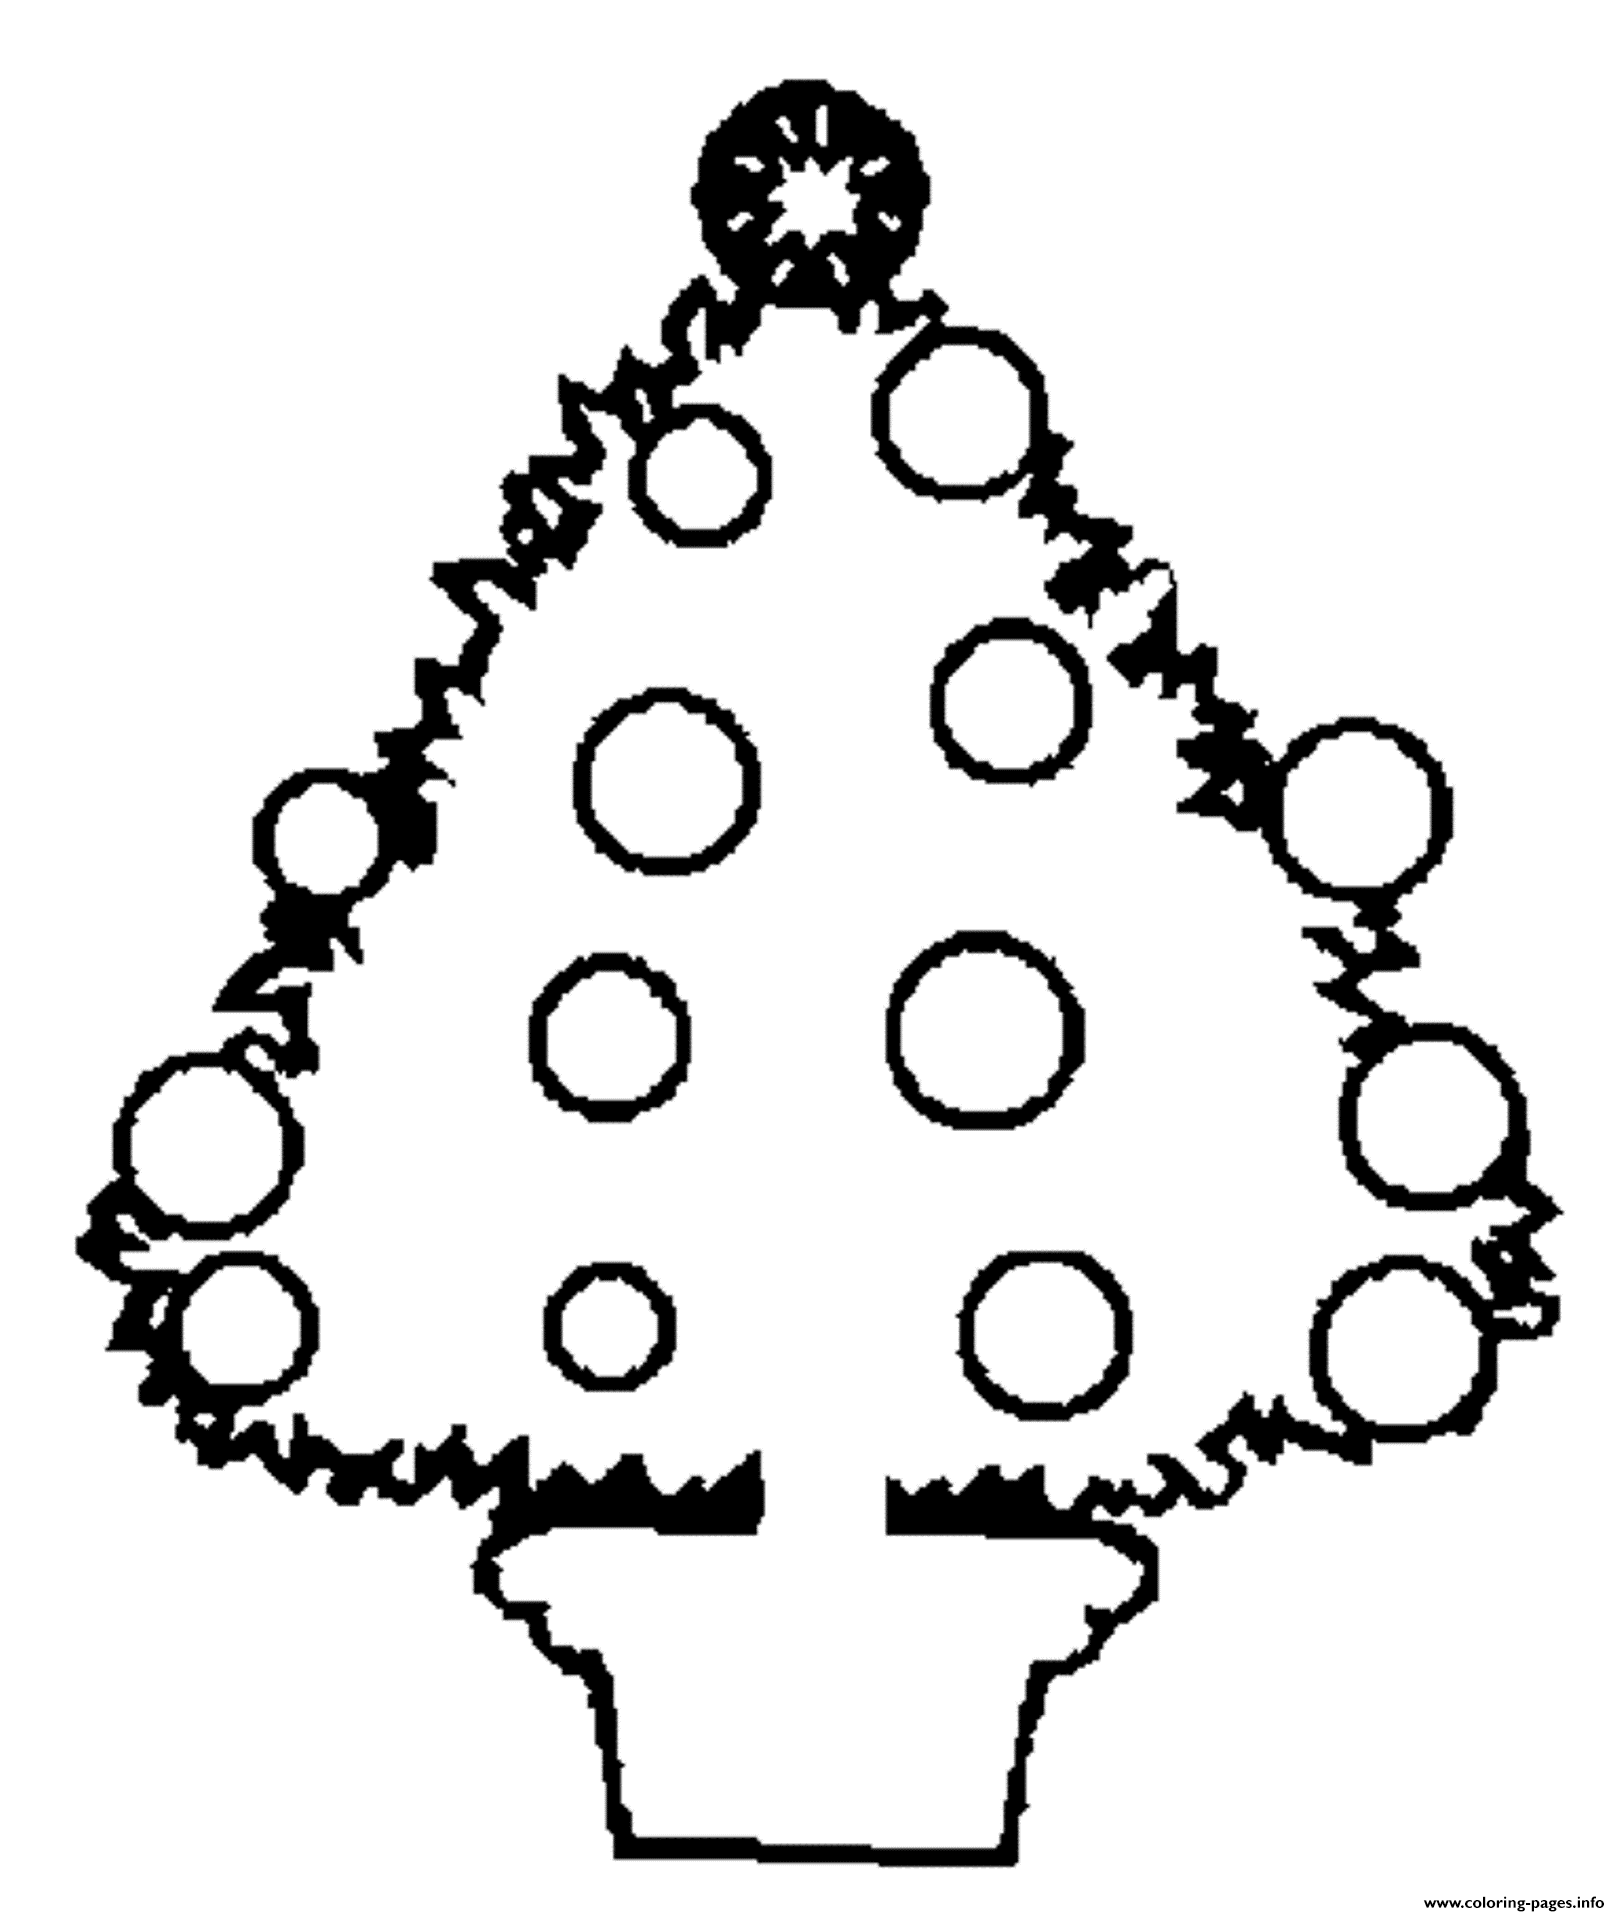 Coloring Pages For Kids Printable Christmas Tree85b8 coloring